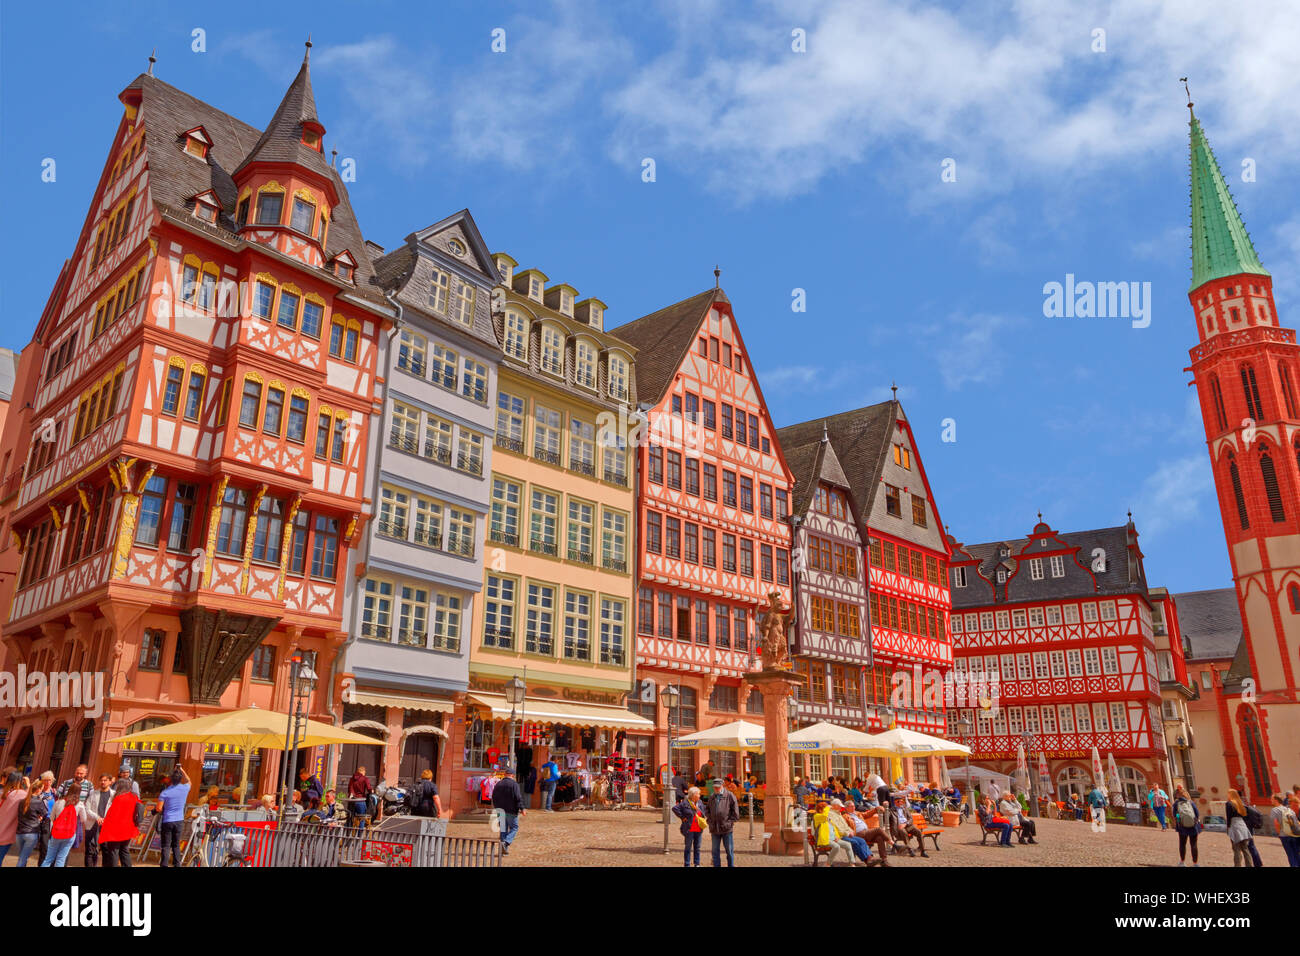 Half timbered buildings on Römerberg in the old town of Frankfurt am Main, Hesse, Germany. Stock Photo